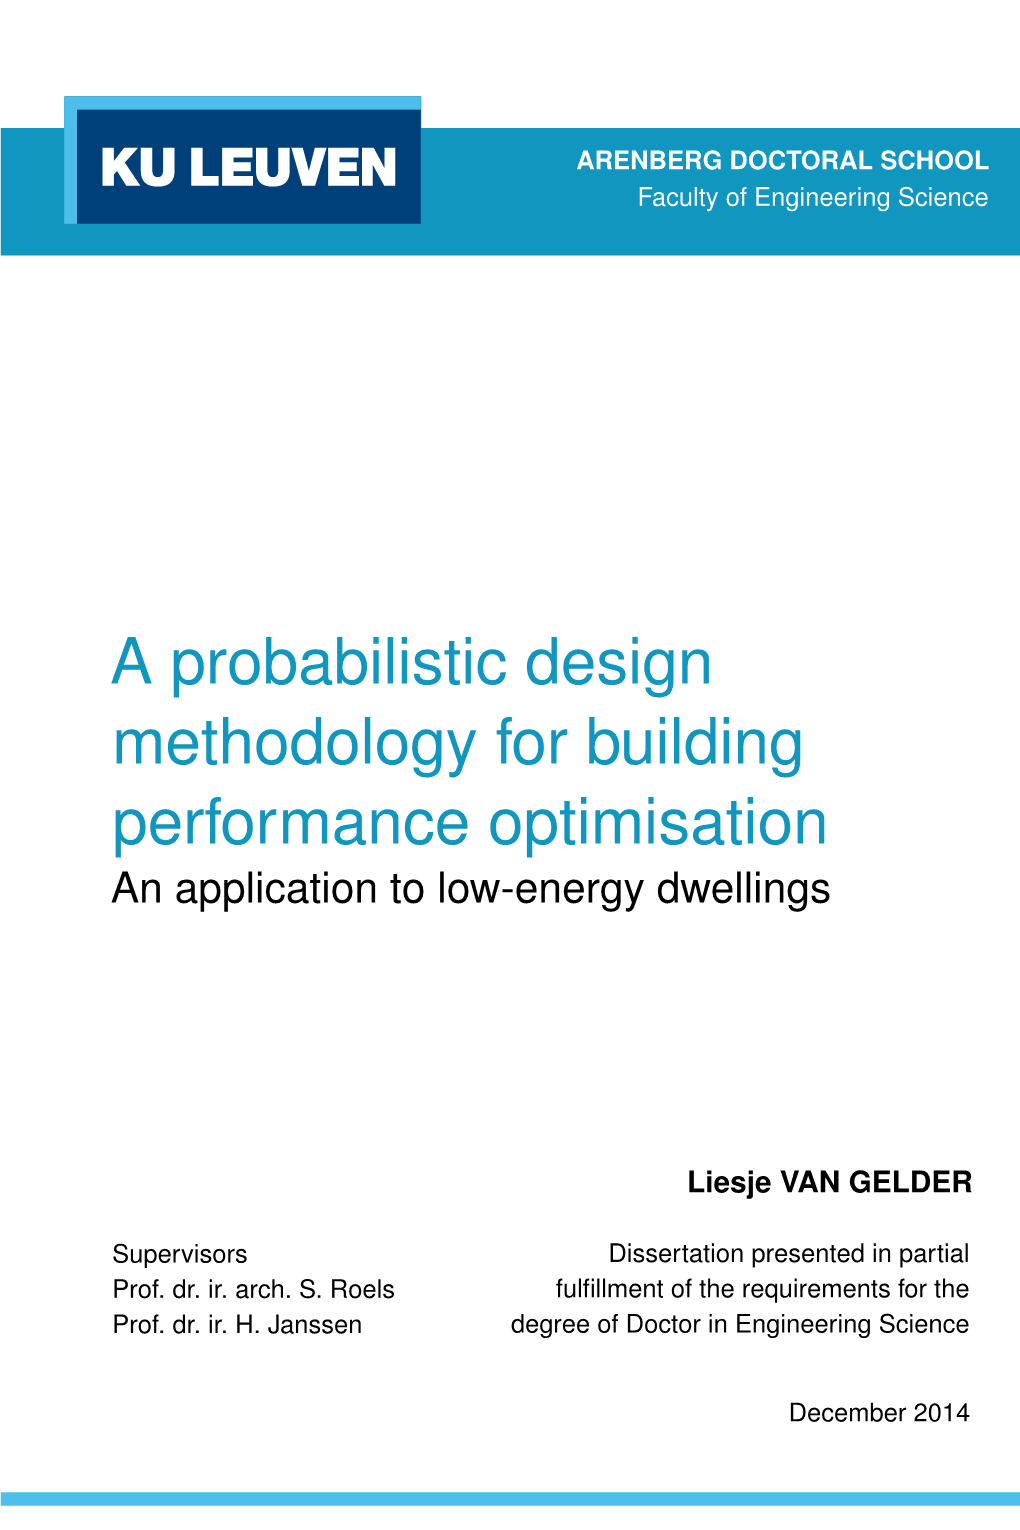 A Probabilistic Design Methodology for Building Performance Optimisation an Application to Low-Energy Dwellings